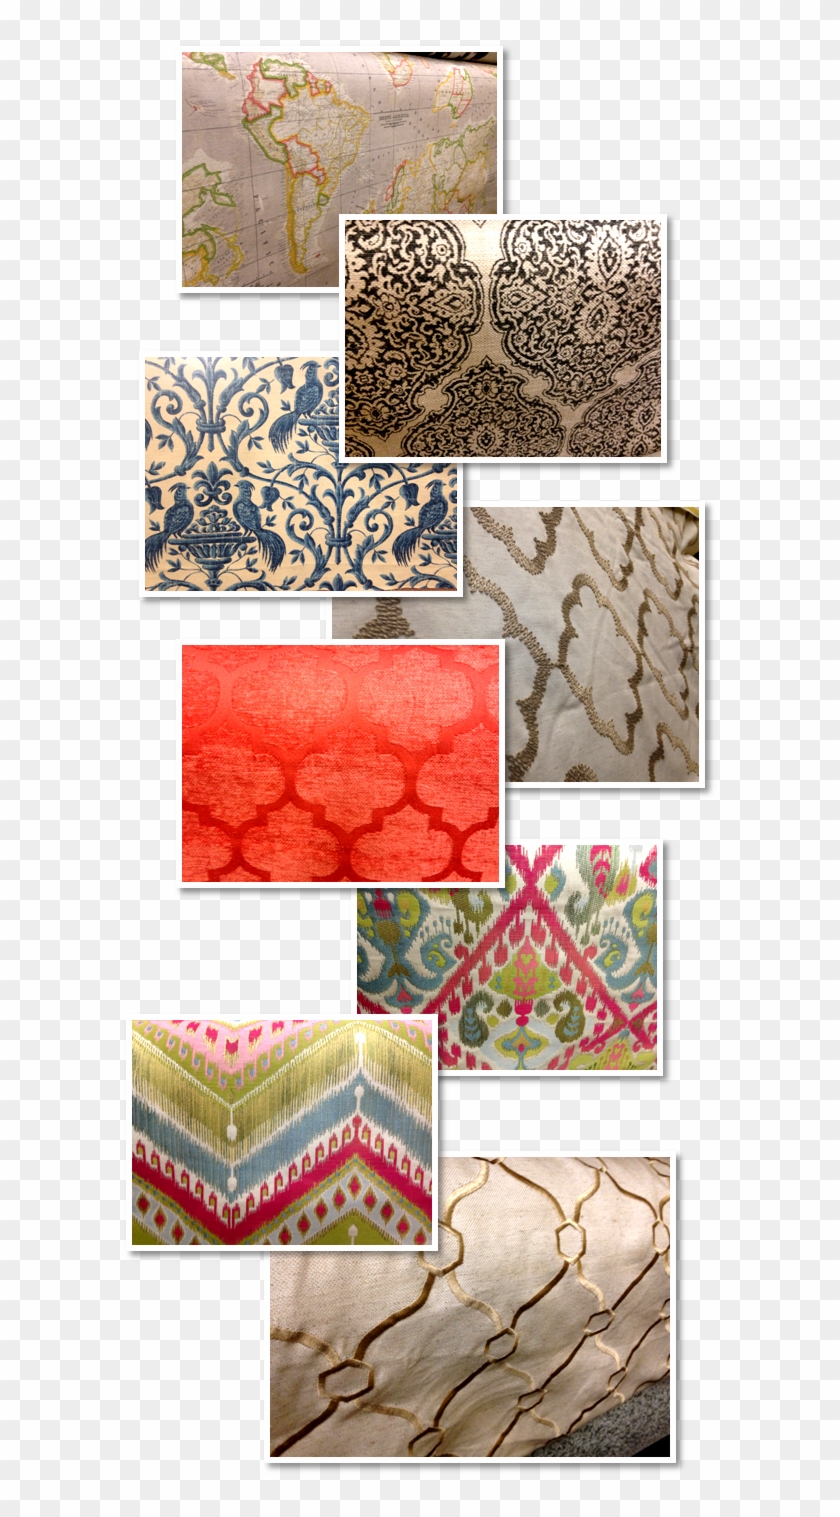 New Fabric Inventory - Motif Clipart #3753867